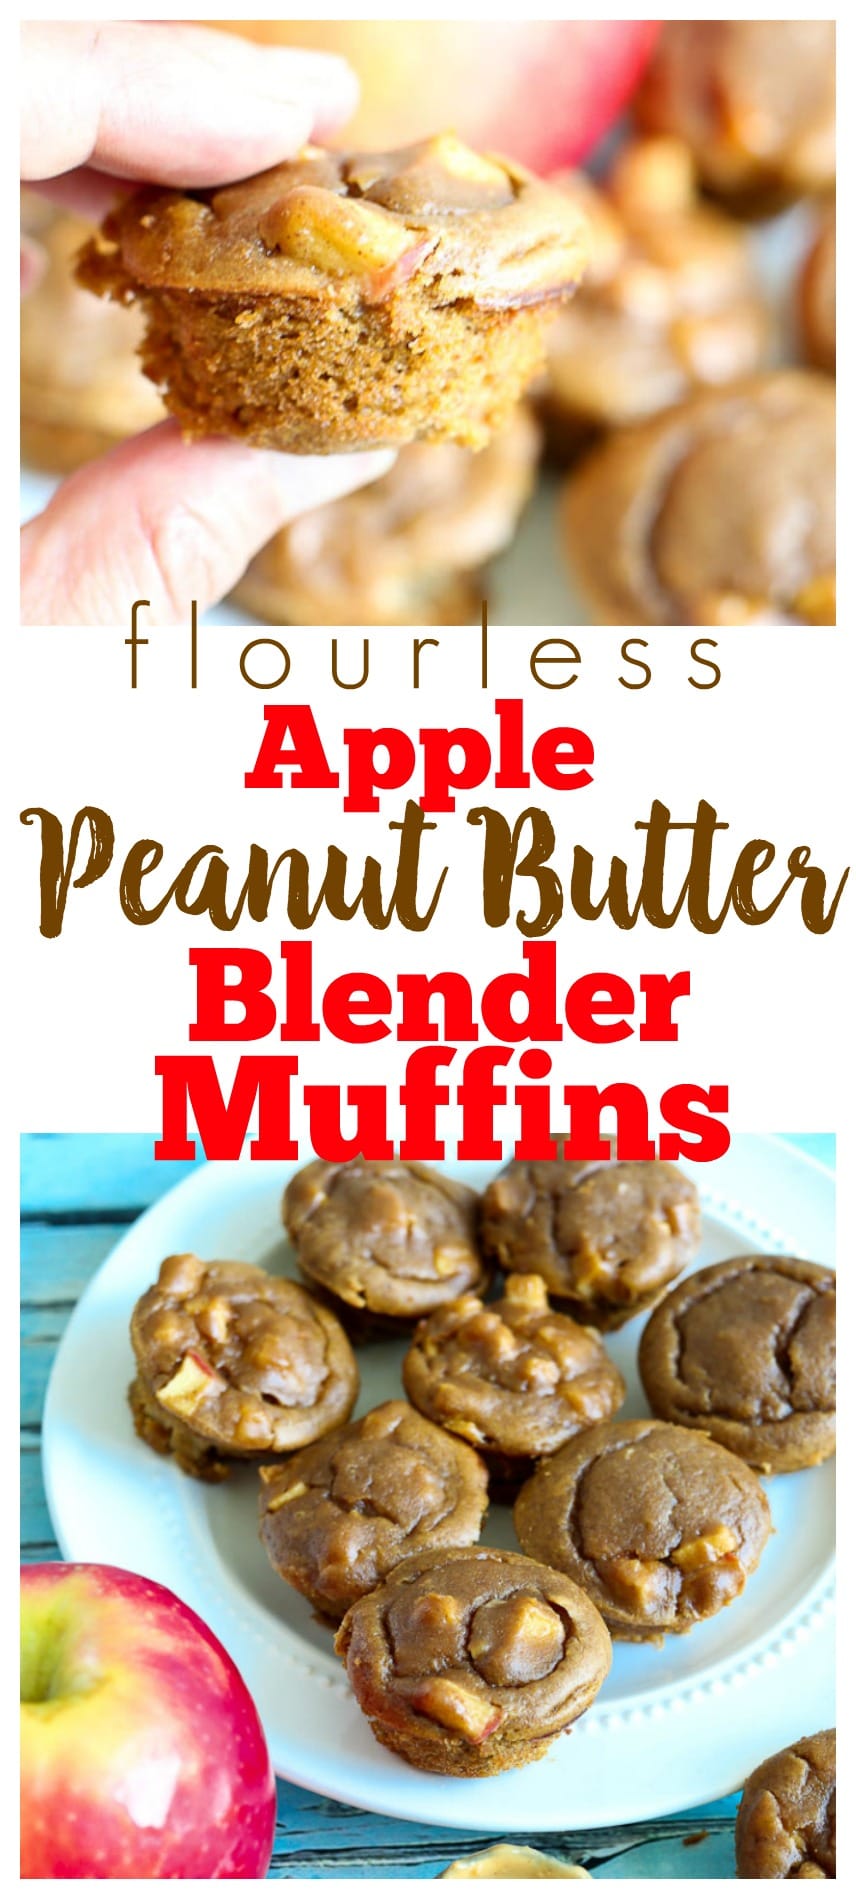 Flourless 15 minutes Apple Peanut Butter Muffins. Gluten-free, healthy, perfect back to school recipe